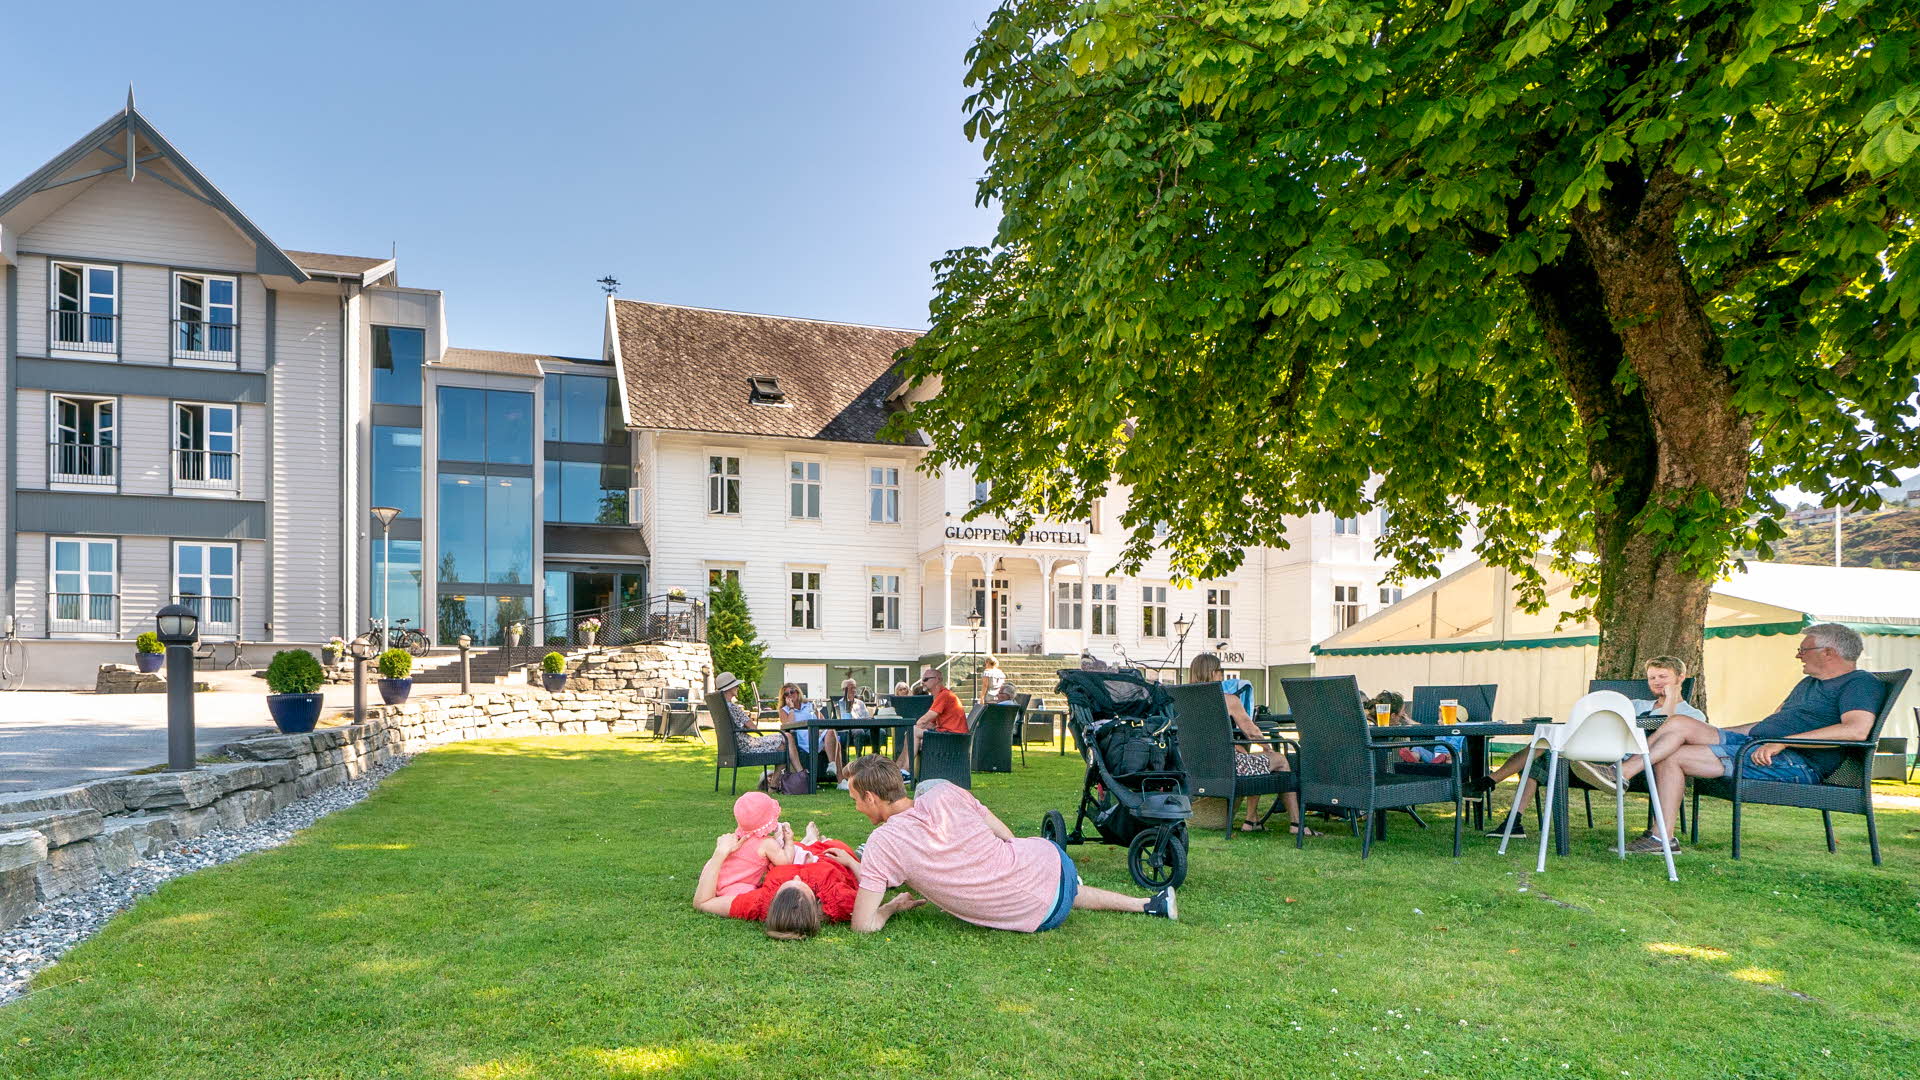 Gloppen Hotel seen from the garden. A family lying on the grass and others sitting at tables in the garden. 